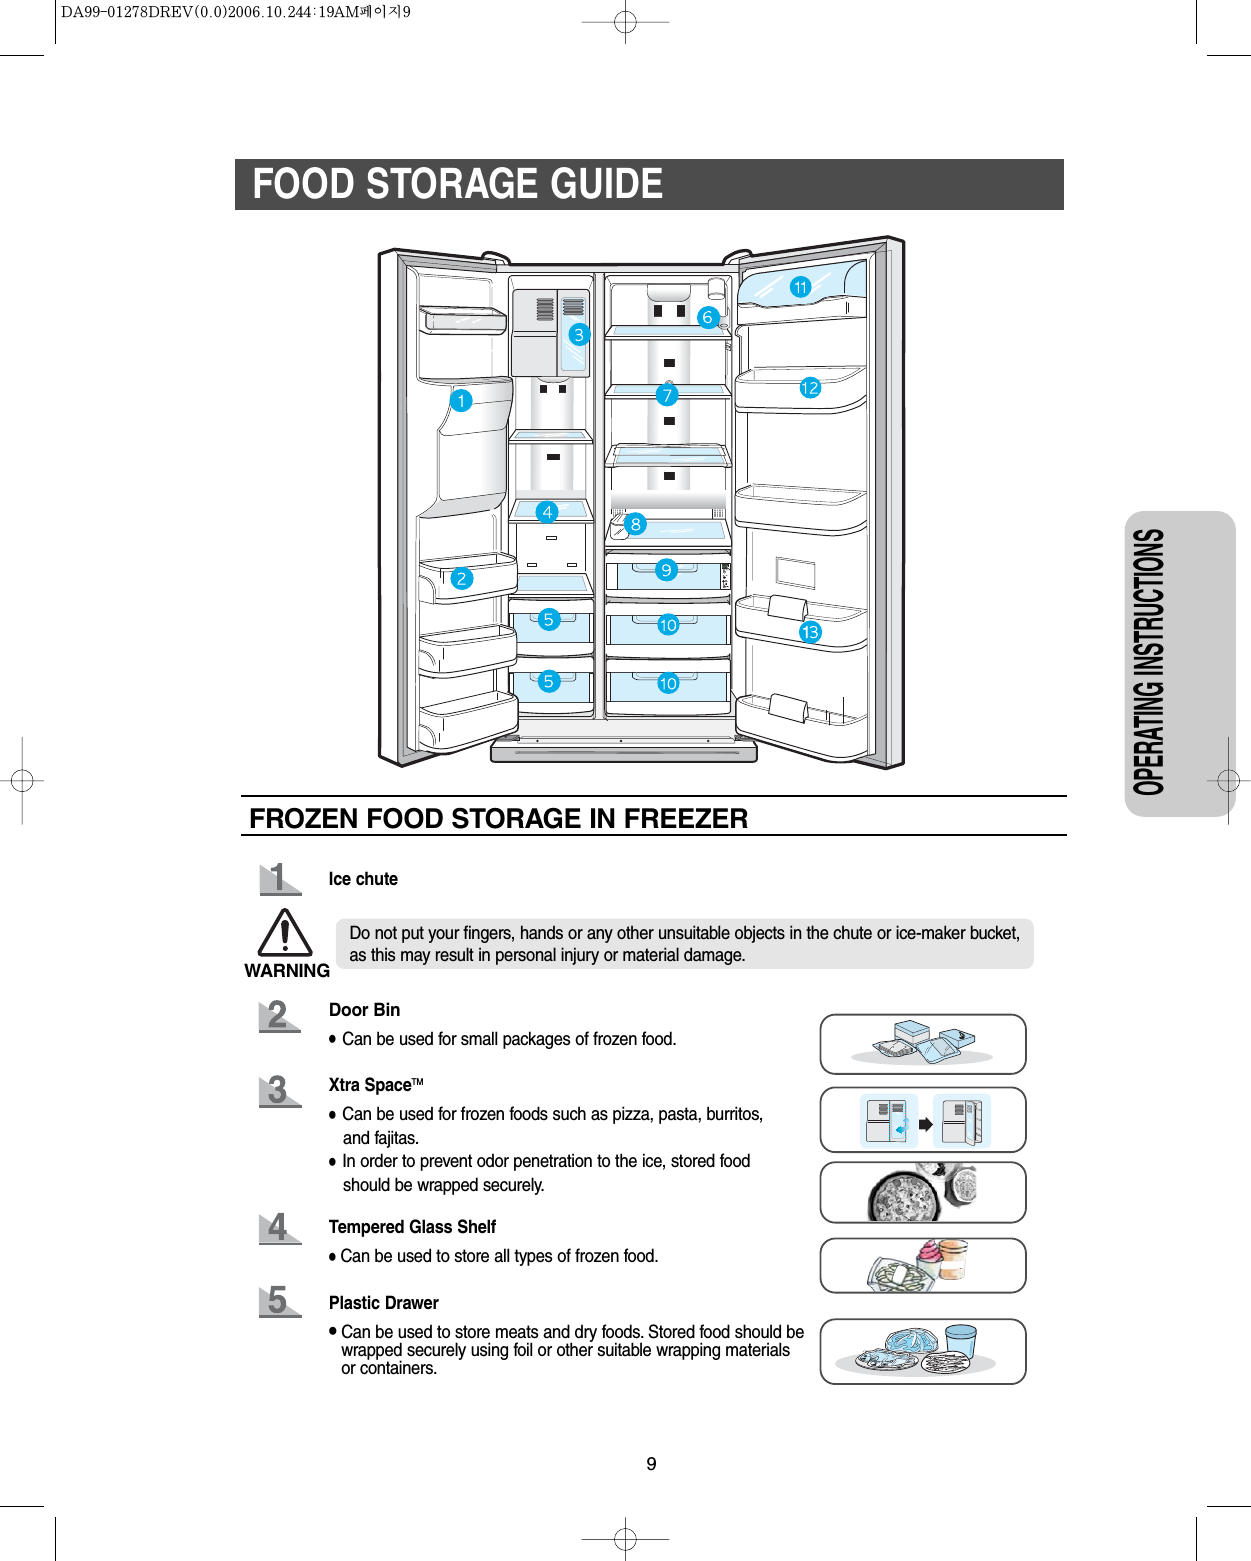 OPERATING INSTRUCTIONS9FOOD STORAGE GUIDEFROZEN FOOD STORAGE IN FREEZERIce chute Door Bin •Can be used for small packages of frozen food.Xtra SpaceTM•Can be used for frozen foods such as pizza, pasta, burritos, and fajitas.•In order to prevent odor penetration to the ice, stored food  should be wrapped securely.Tempered Glass Shelf•Can be used to store all types of frozen food.Plastic Drawer•Can be used to store meats and dry foods. Stored food should bewrapped securely using foil or other suitable wrapping materialsor containers.WARNINGDo not put your fingers, hands or any other unsuitable objects in the chute or ice-maker bucket,as this may result in personal injury or material damage.